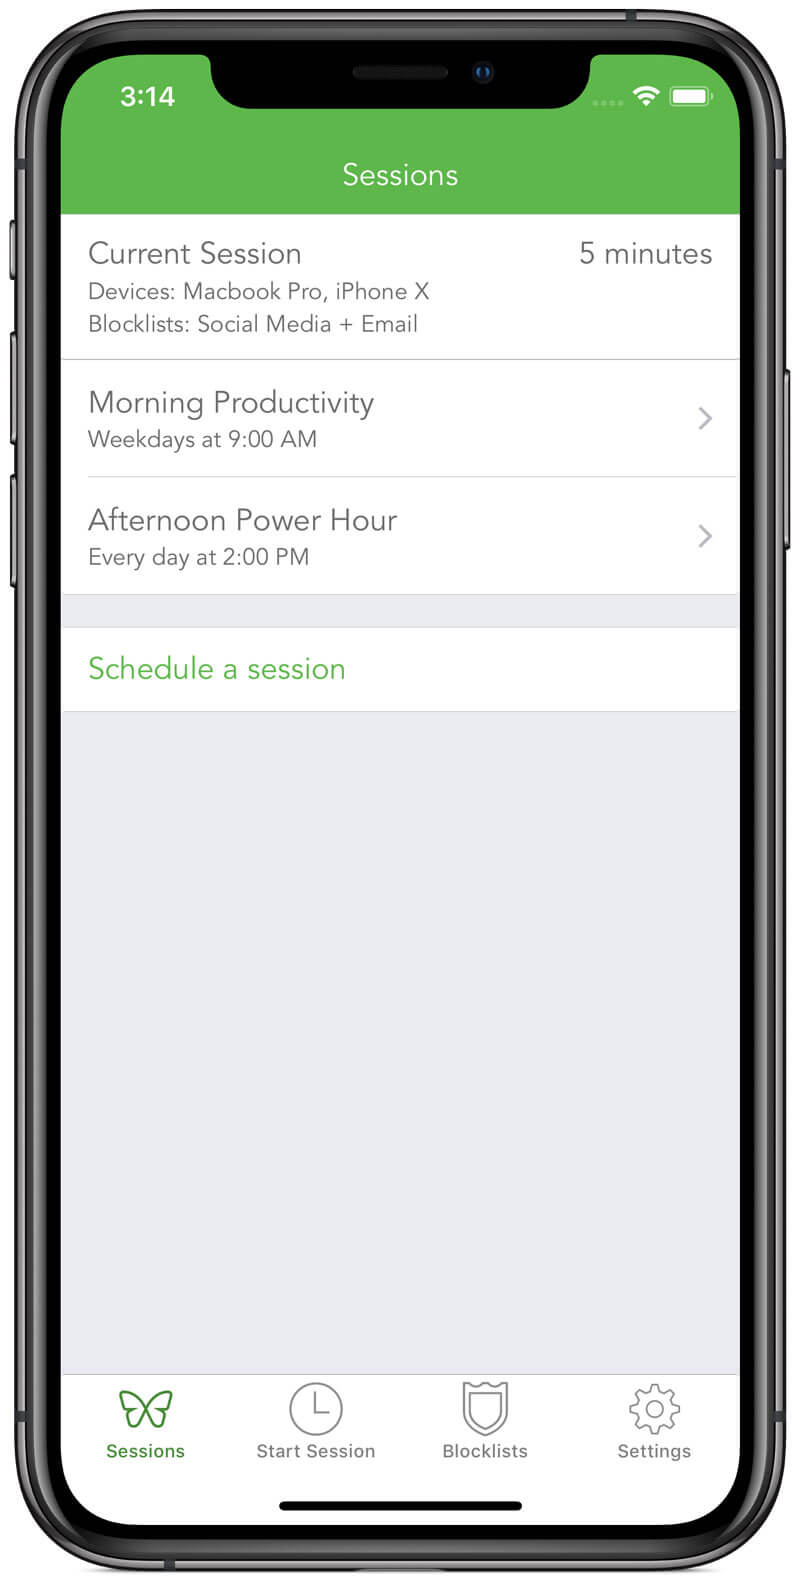 A screenshot showing a list of recurring sessions, with names like morning productivity (weekdays at 9:00 AM) and afternoon power hour (Every day at 2:00 PM).